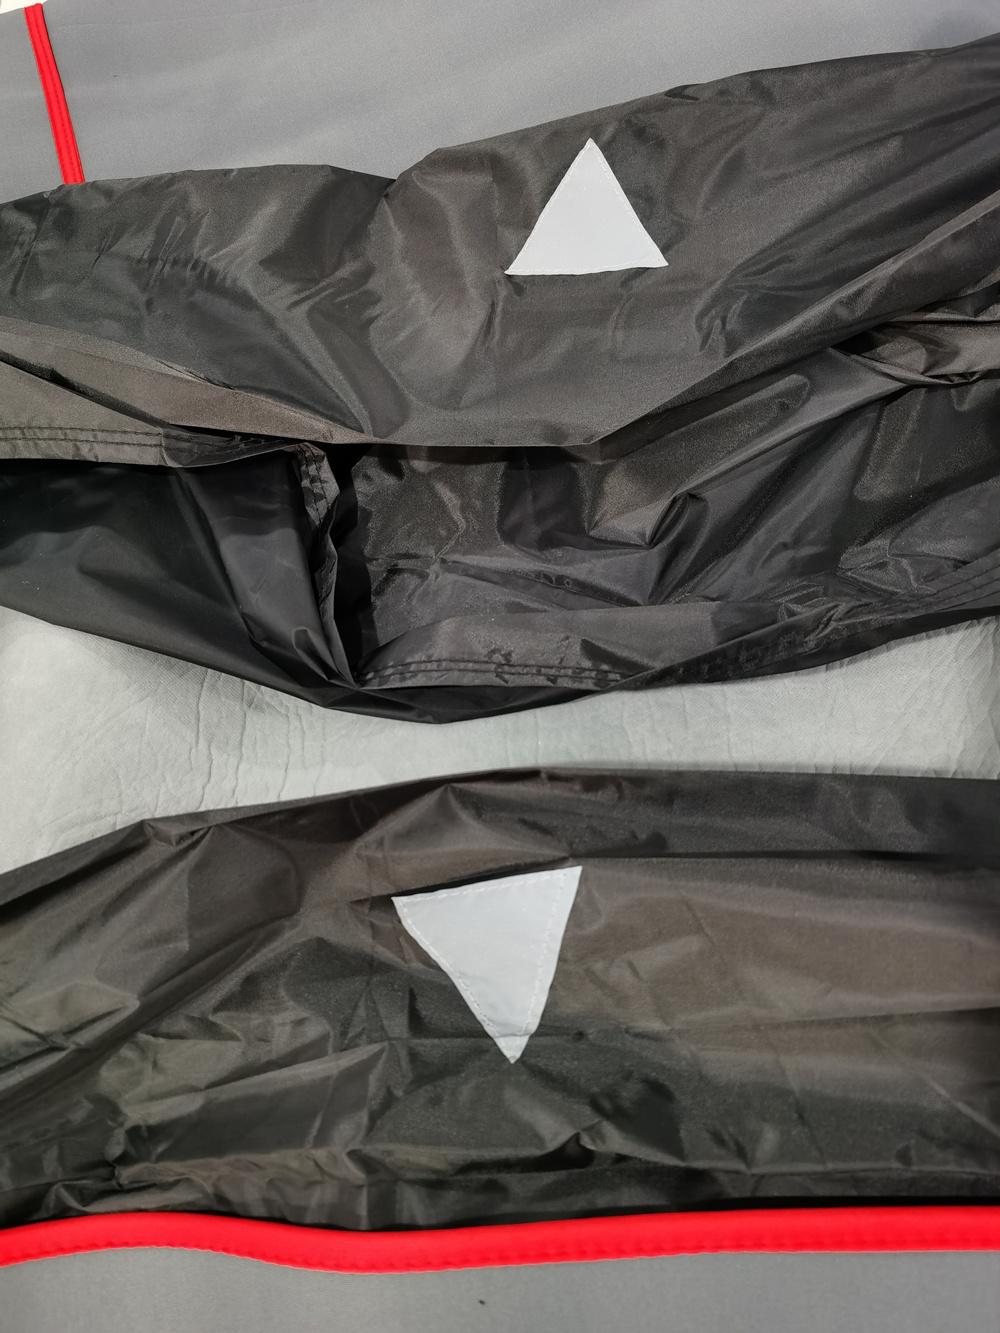 Car Covers Hail Protection 7mm EVA Padded